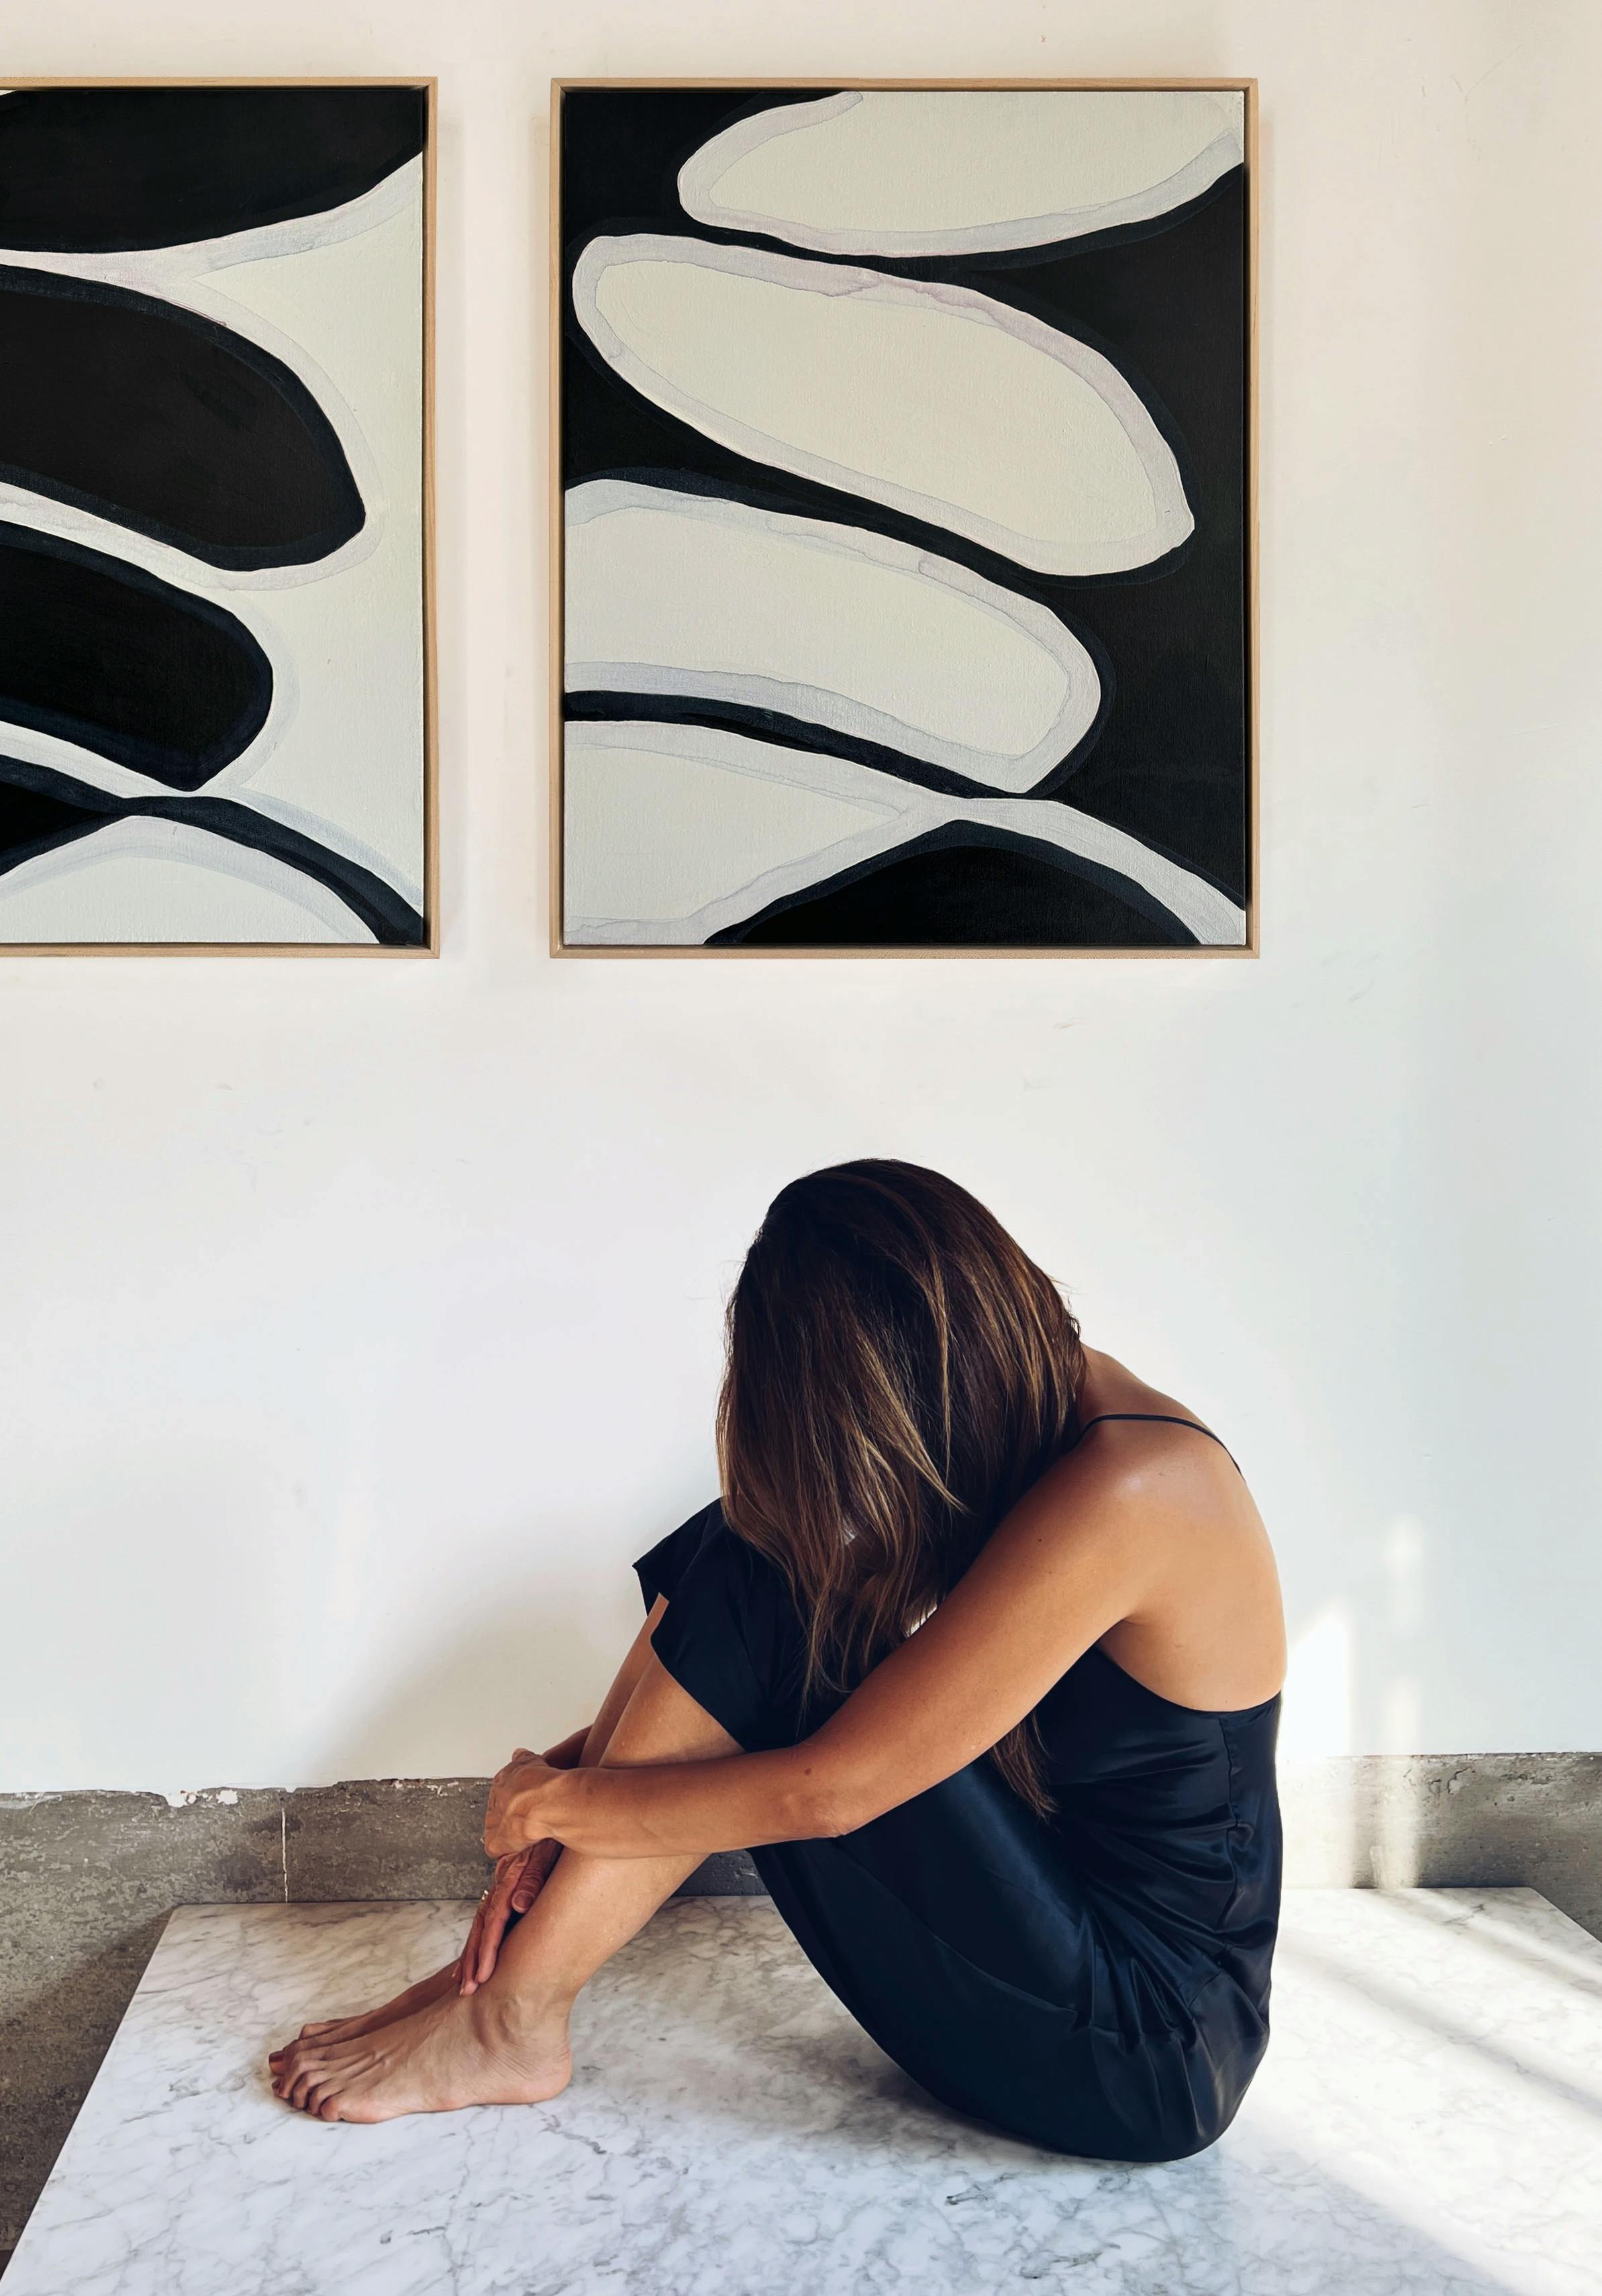 Artist Karina Bania crouched below two black and white abstract floral paintings in her studio.